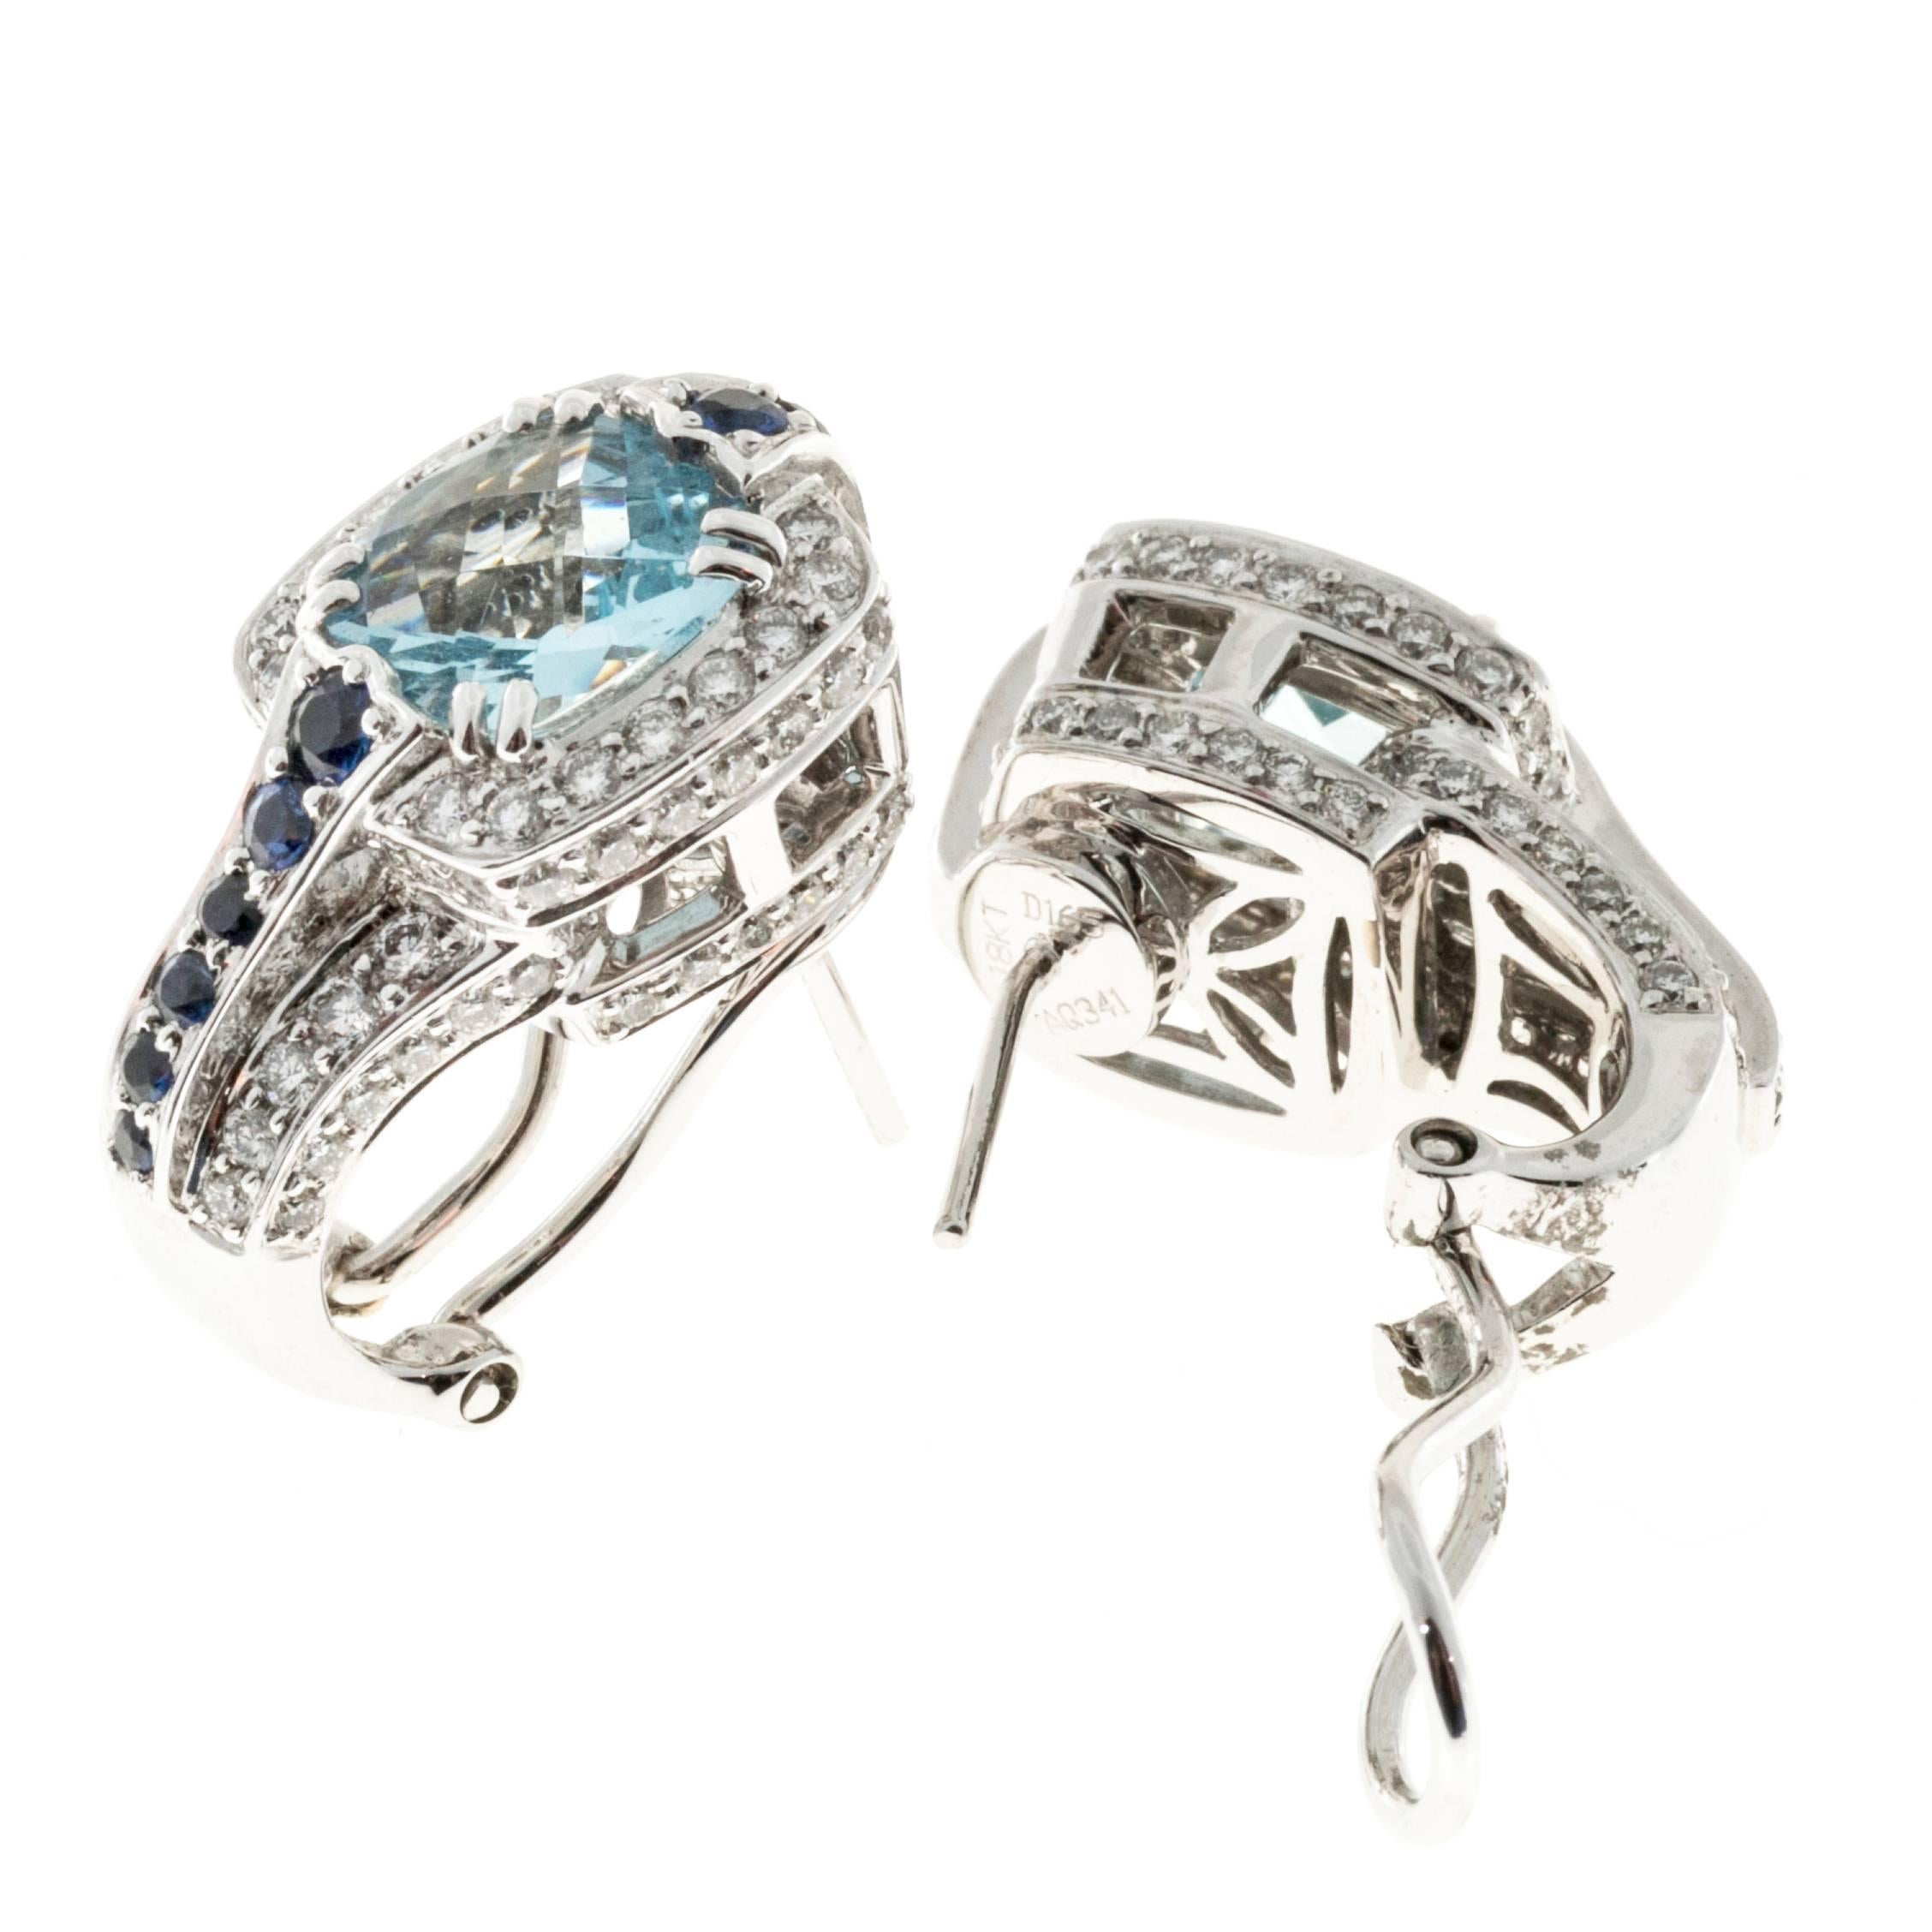 Charles Krypell natural untreated Aqua earrings in 18k white gold with  diamonds and fine Sapphires. 

2 natural cushion Aqua, approx. total weight 3.41ct, 8.5 x 8.5mm
22 round fine Sapphires approx. total weight .60cts
168 diamonds approx.